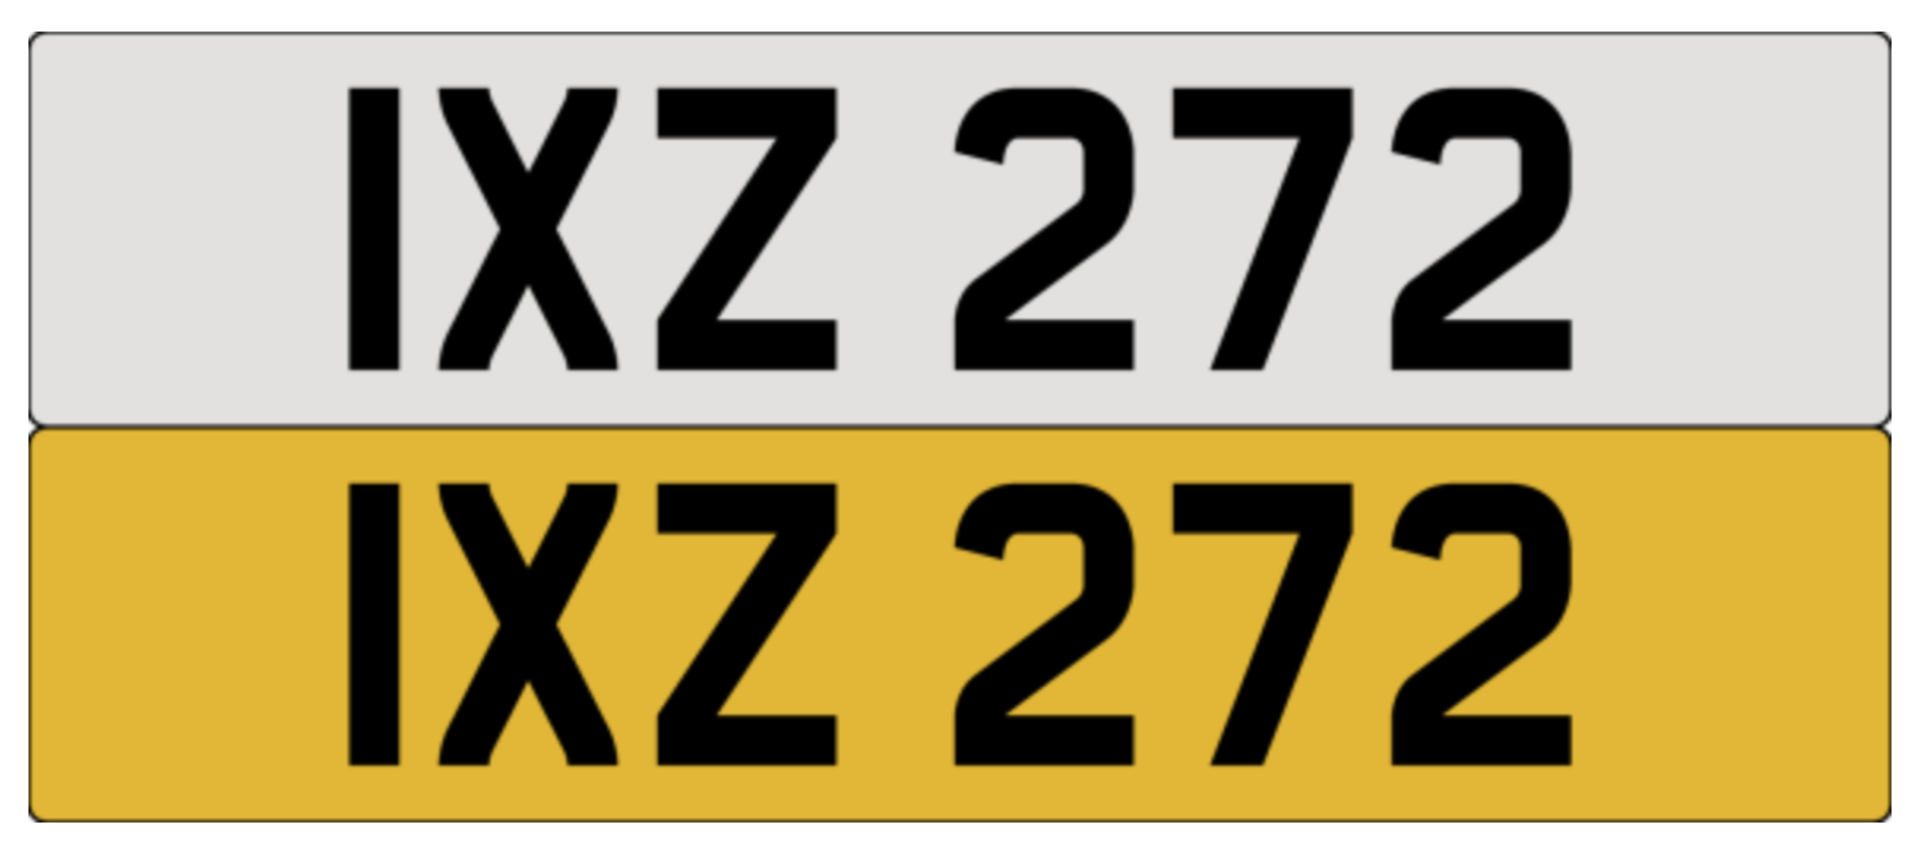 On DVLA retention, ready to transfer IXZ 272 .- Please note, VAT applies on the hammer.